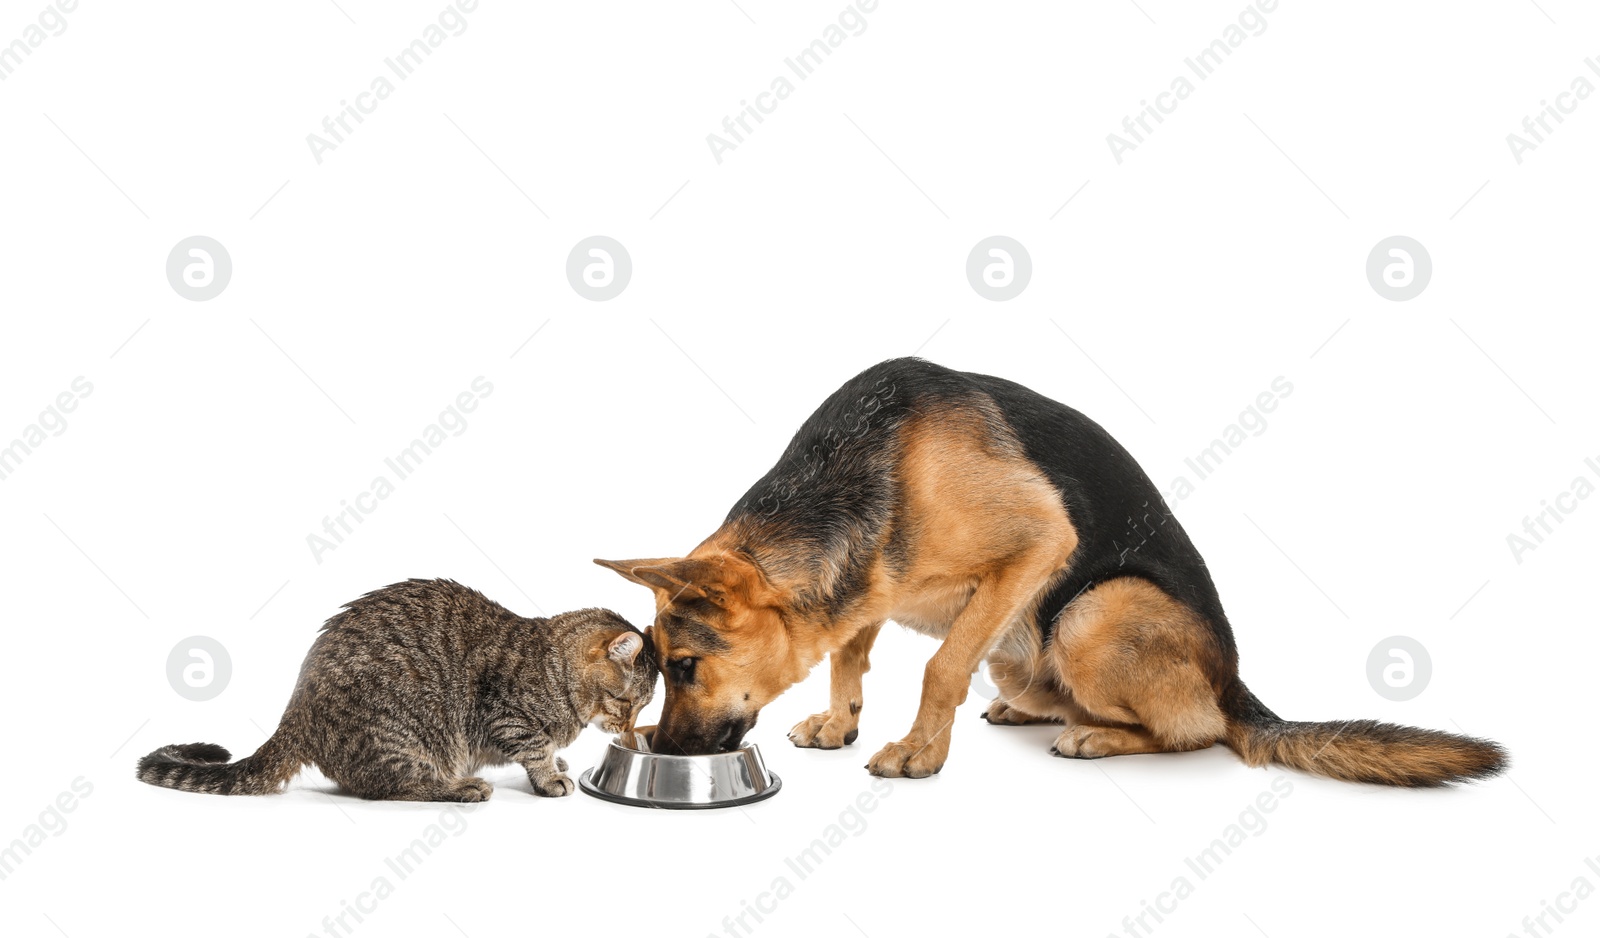 Photo of Adorable cat and dog sharing bowl of food on white background. Animal friendship